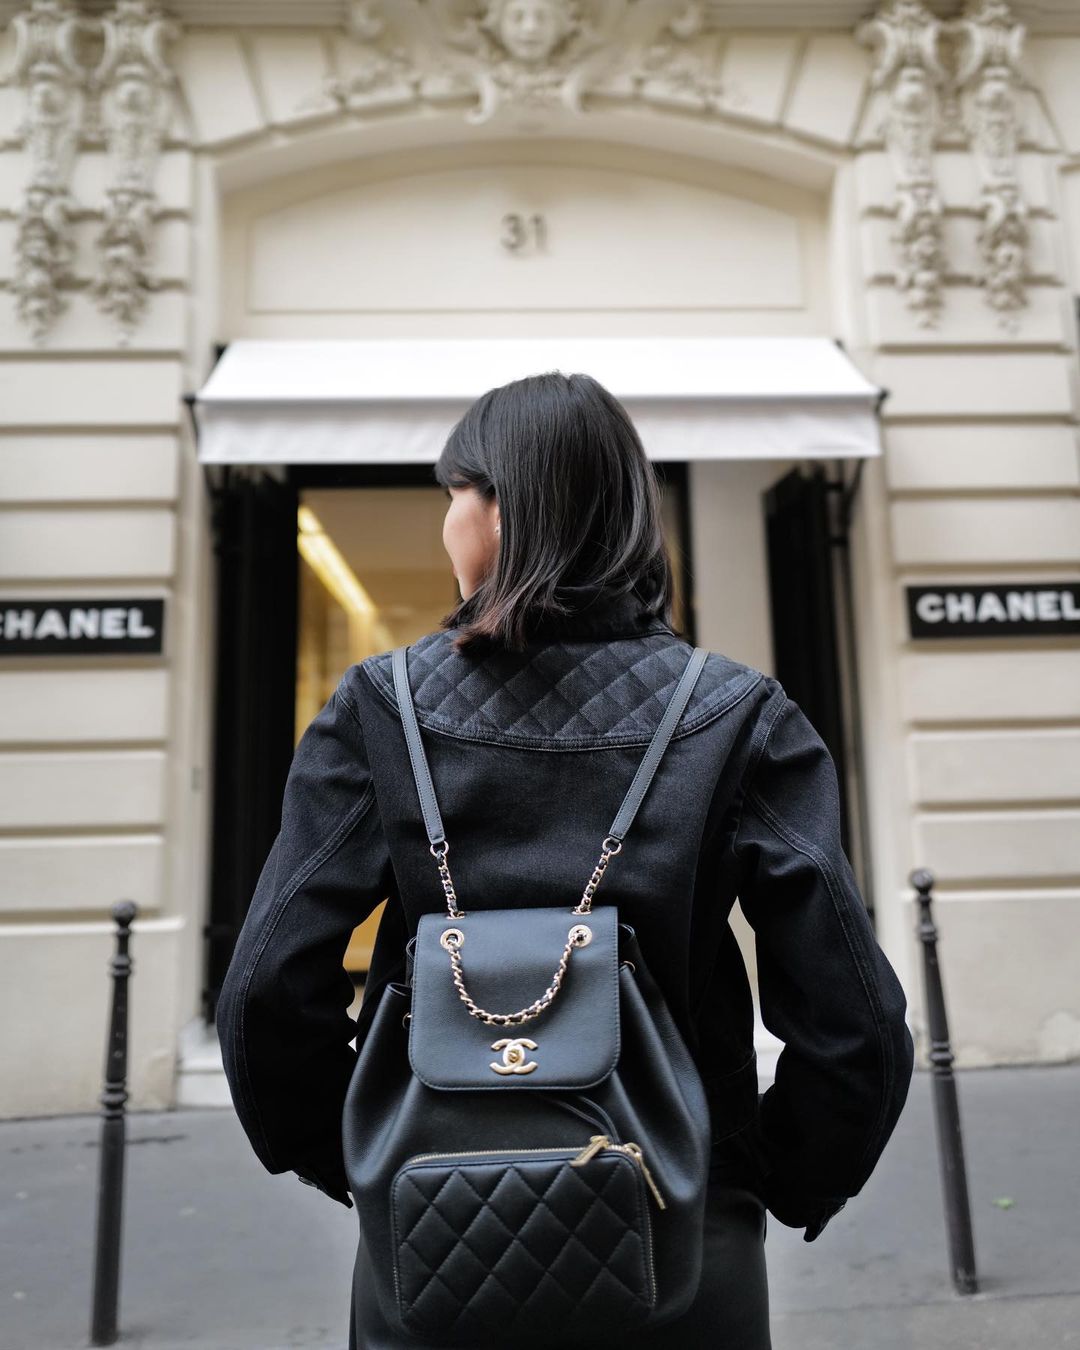 Chanel Black Caviar Leather Small Business Affinity Flap Bag Chanel